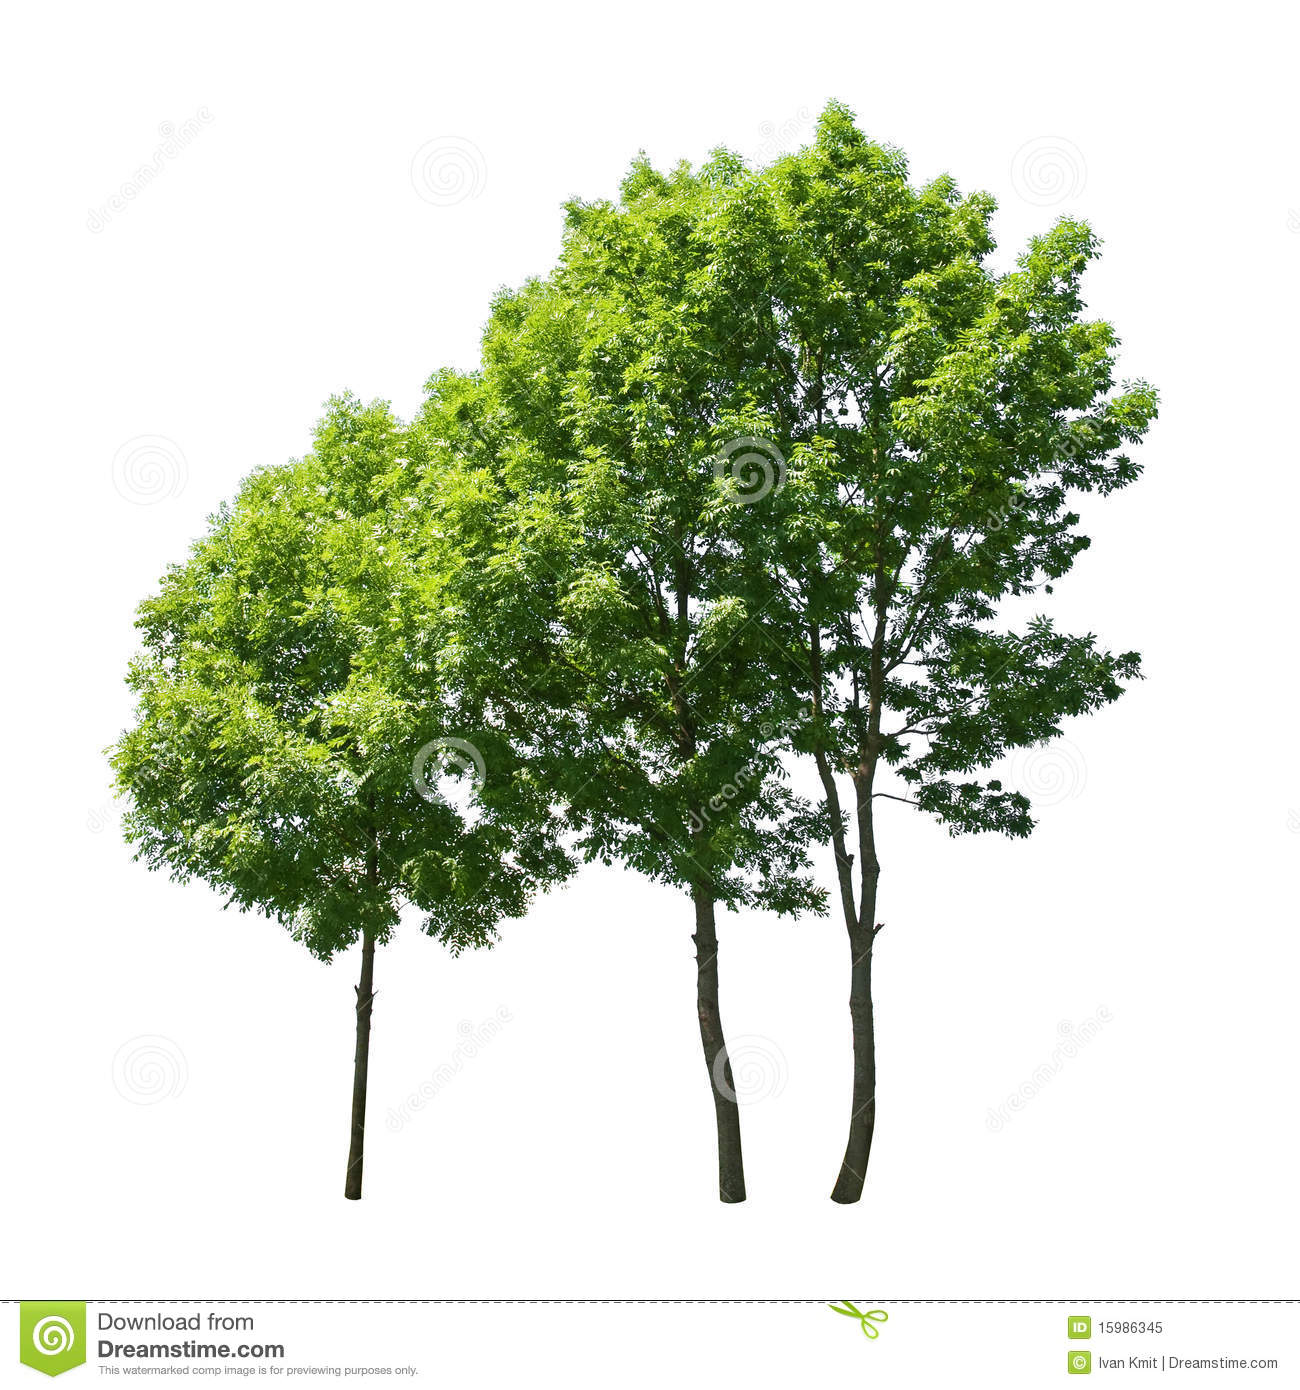 Royalty Free Tree Images